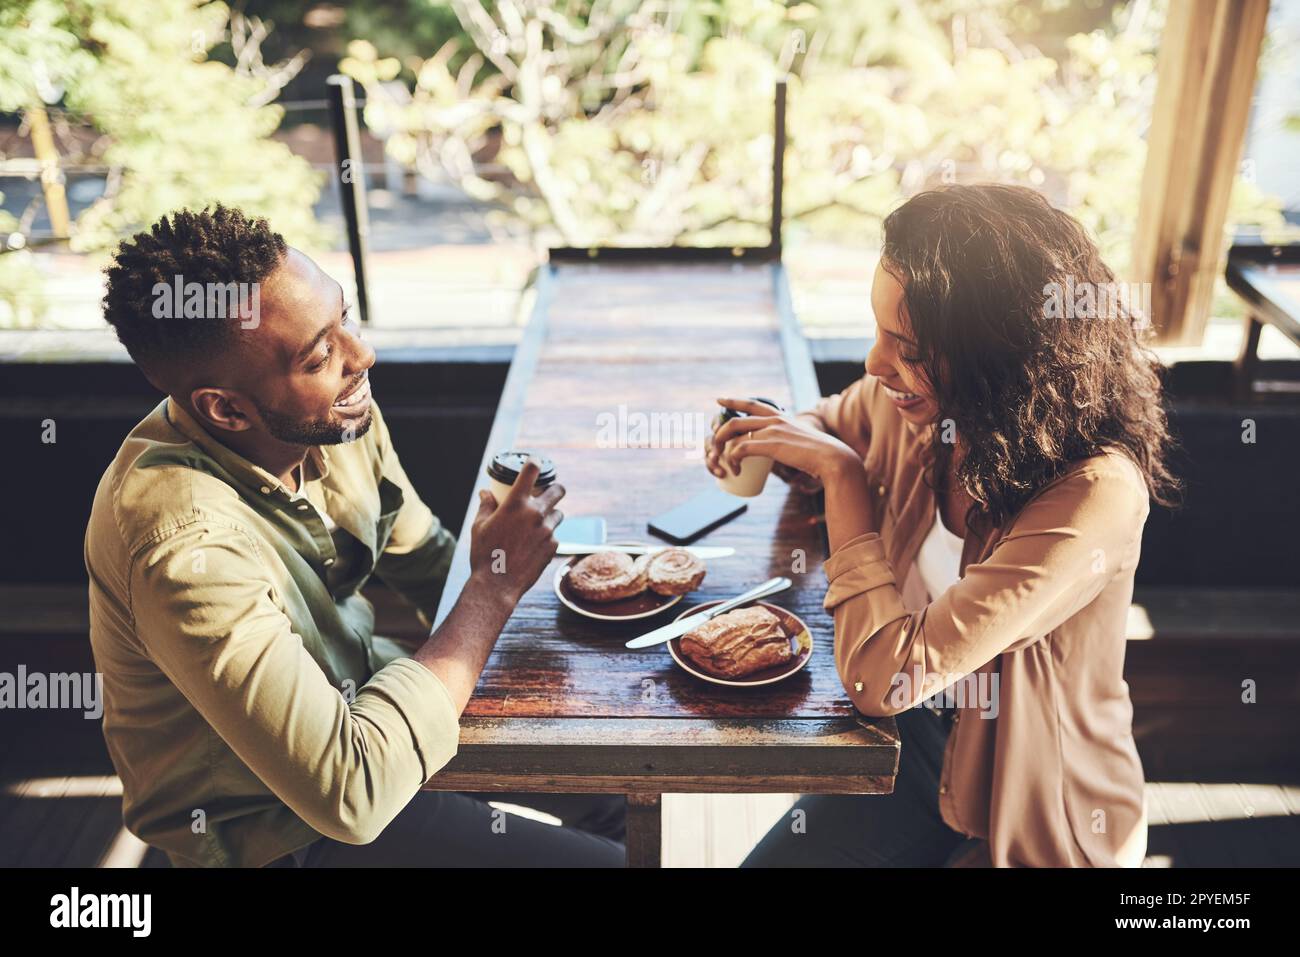 Youre even more beautiful than your dating profile. a young couple having pastries at a coffee shop. Stock Photo